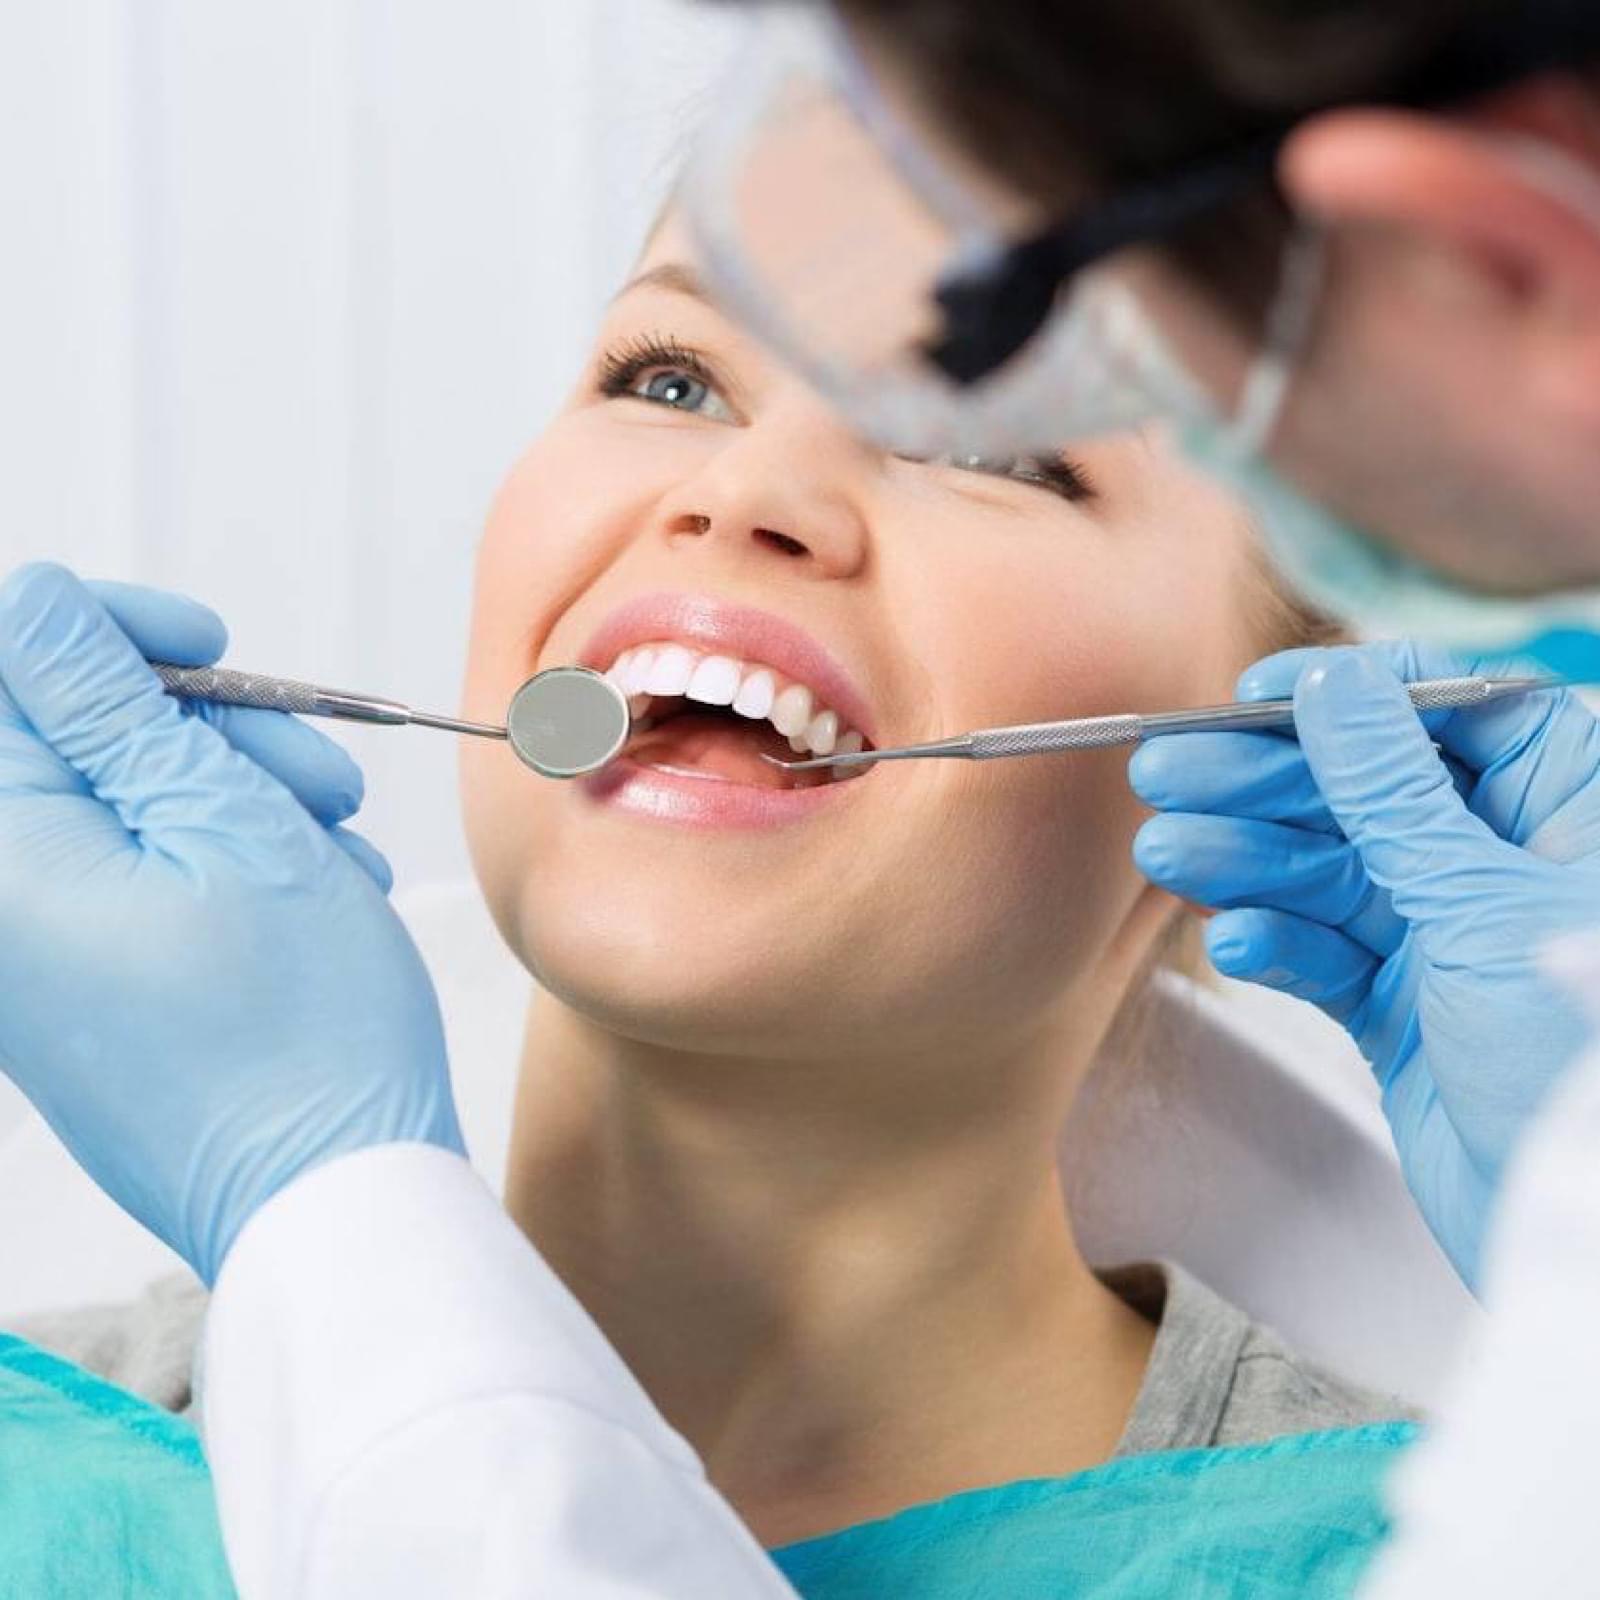 The Significant Benefits of Visiting a Miami Holistic Dentist